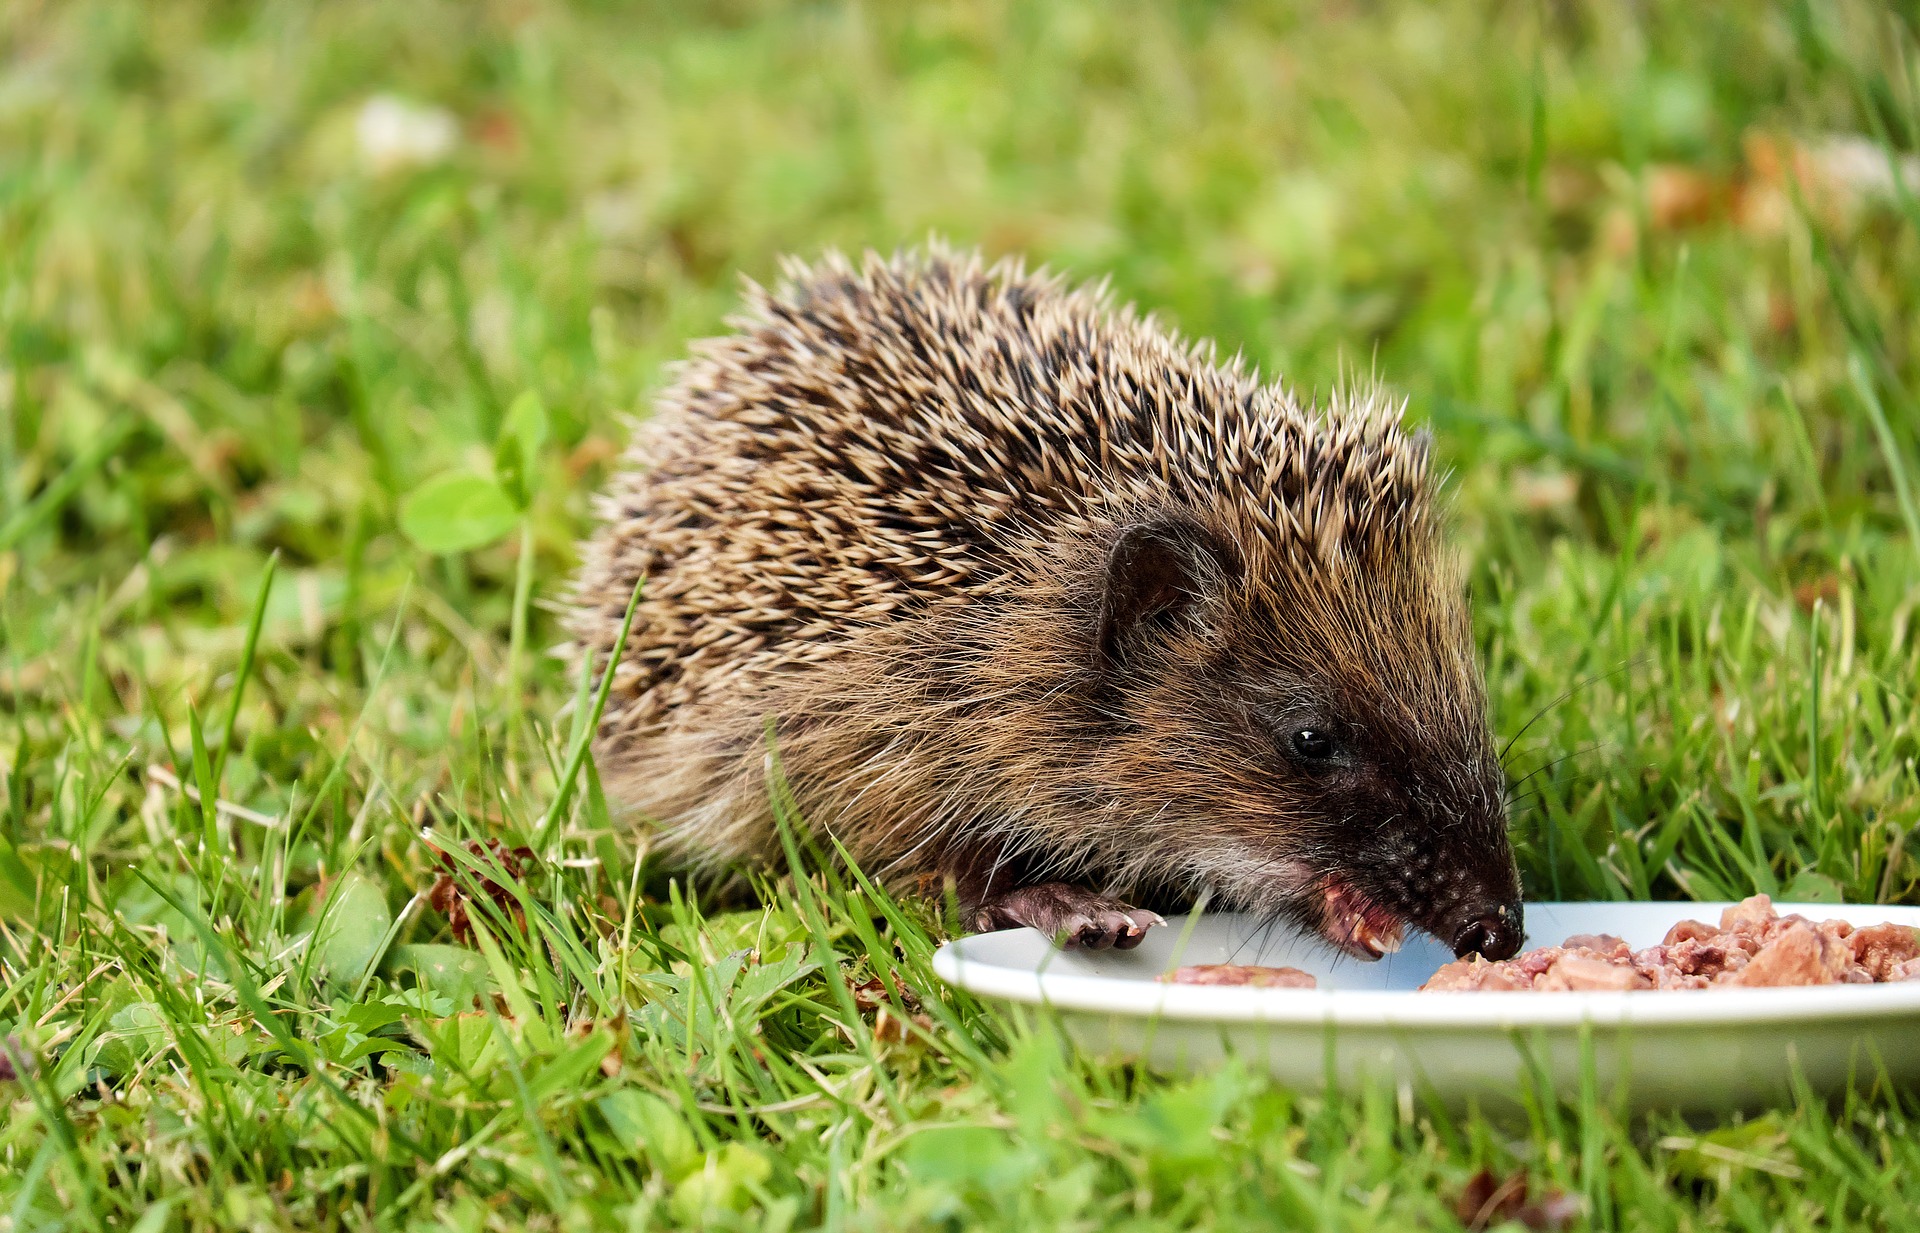 Hedgehog at the plate with food